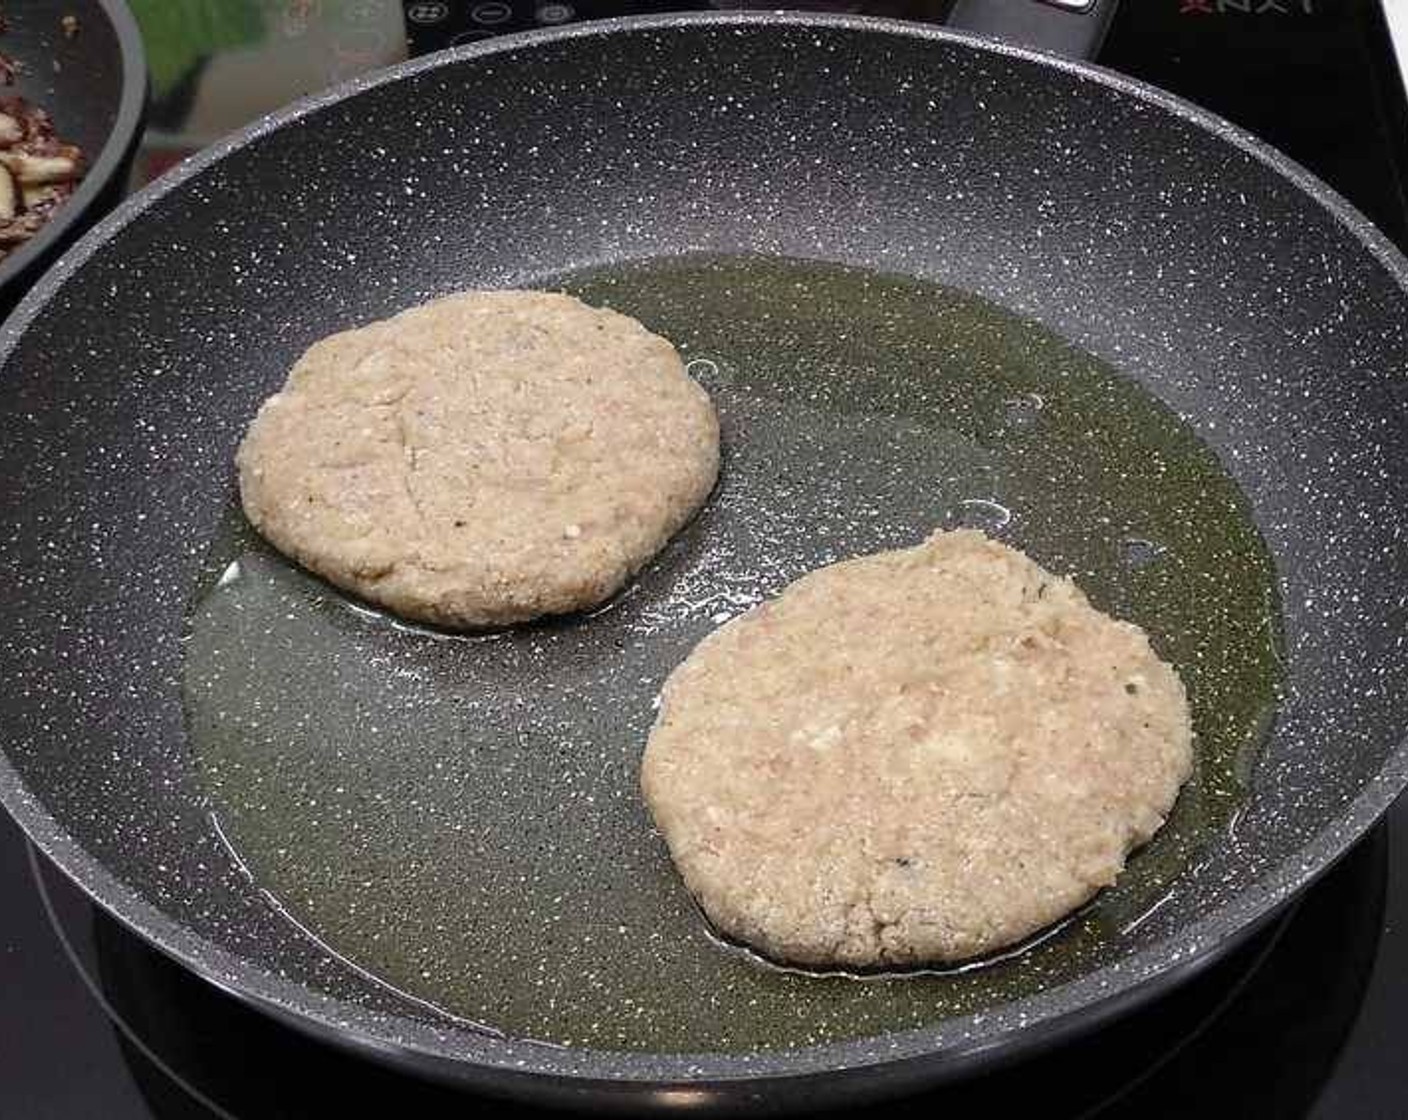 step 4 Heat up some Olive Oil (as needed) in a pan and fry the patties until they are cooked through.